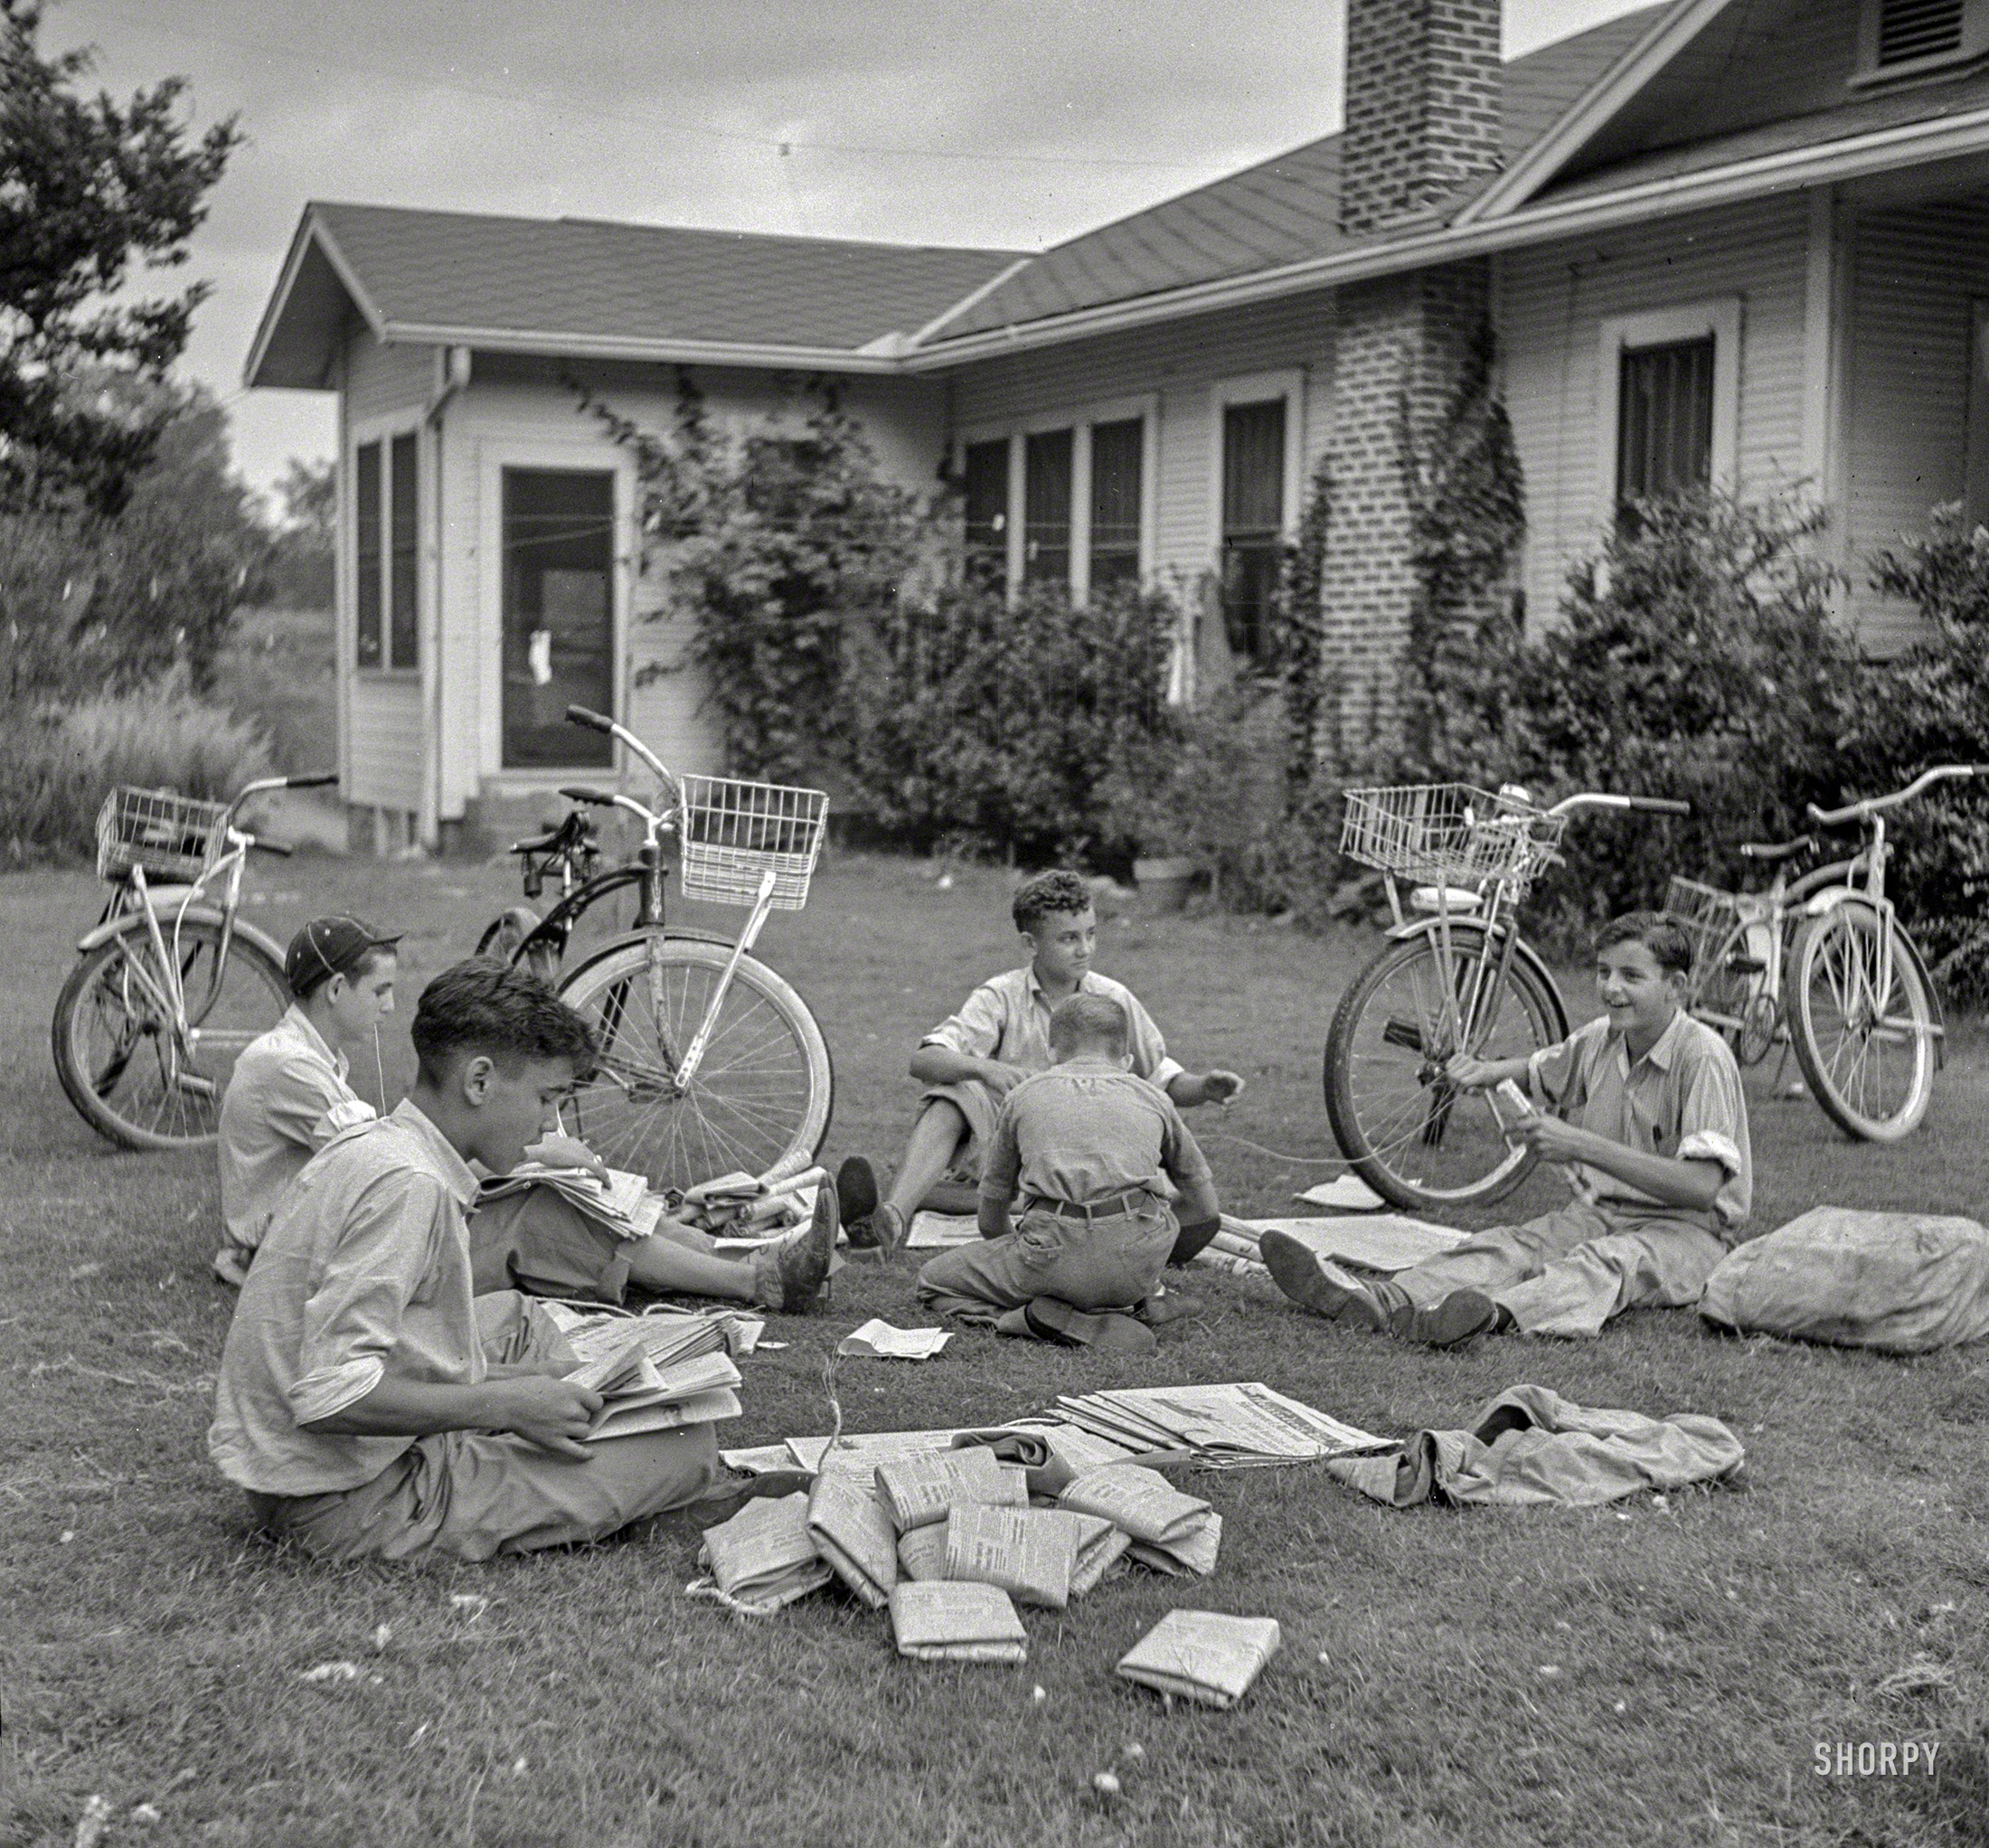 July 1940. "Boys in Natchitoches, Louisiana, folding papers before delivering them in the afternoon." Photo by Marion Post Wolcott. View full size.